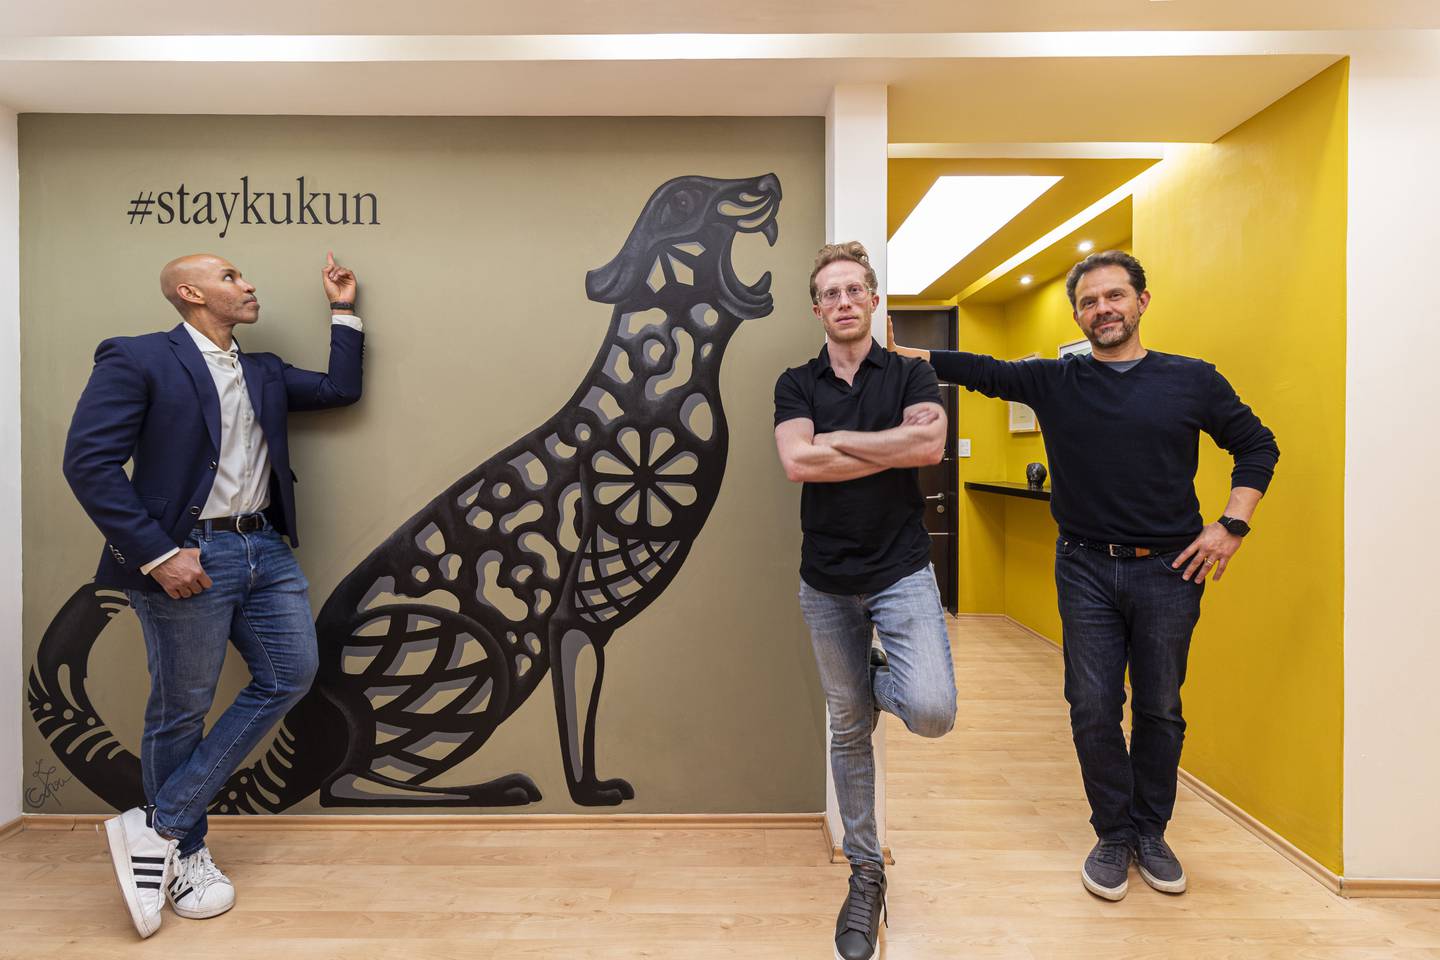 Kukun, a Mexican proptech, raised seed capital this week.